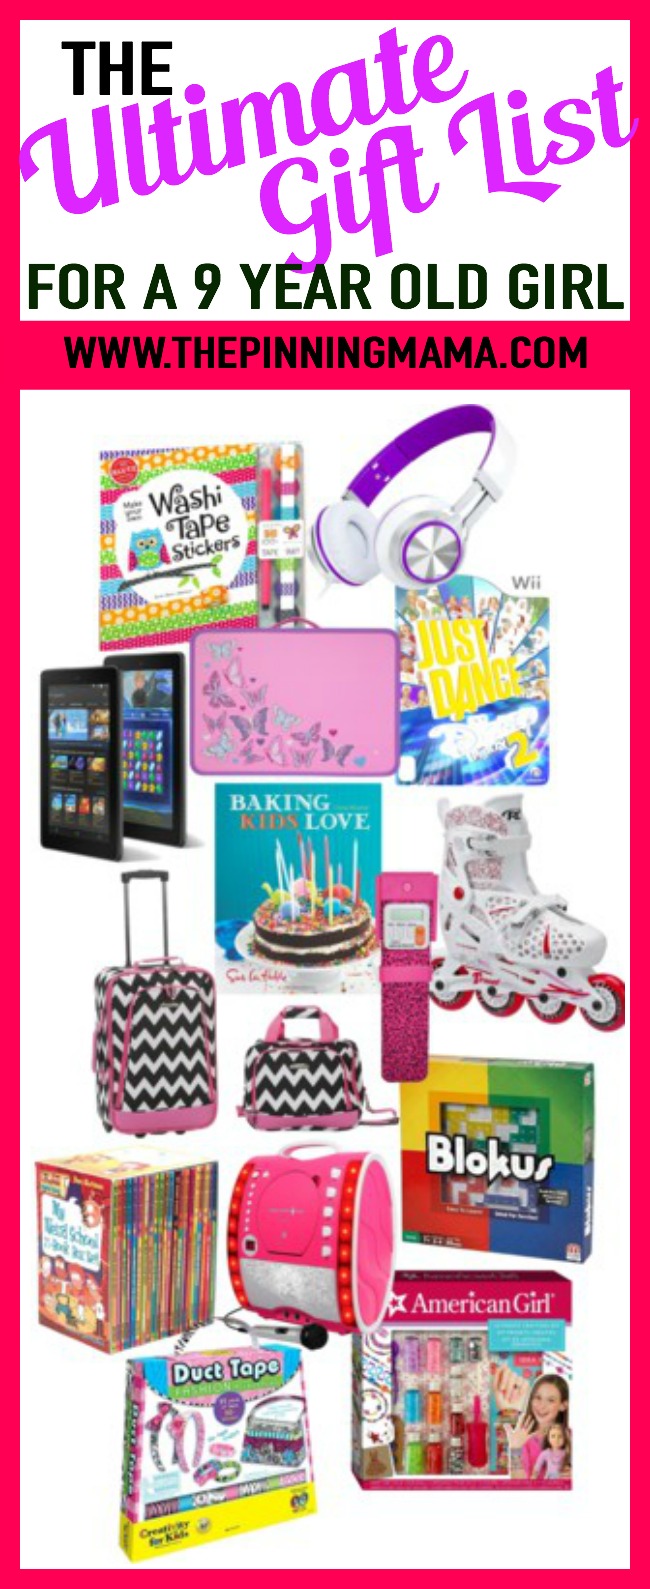 The Ultimate Gift List for a 9 Year Old Girl.